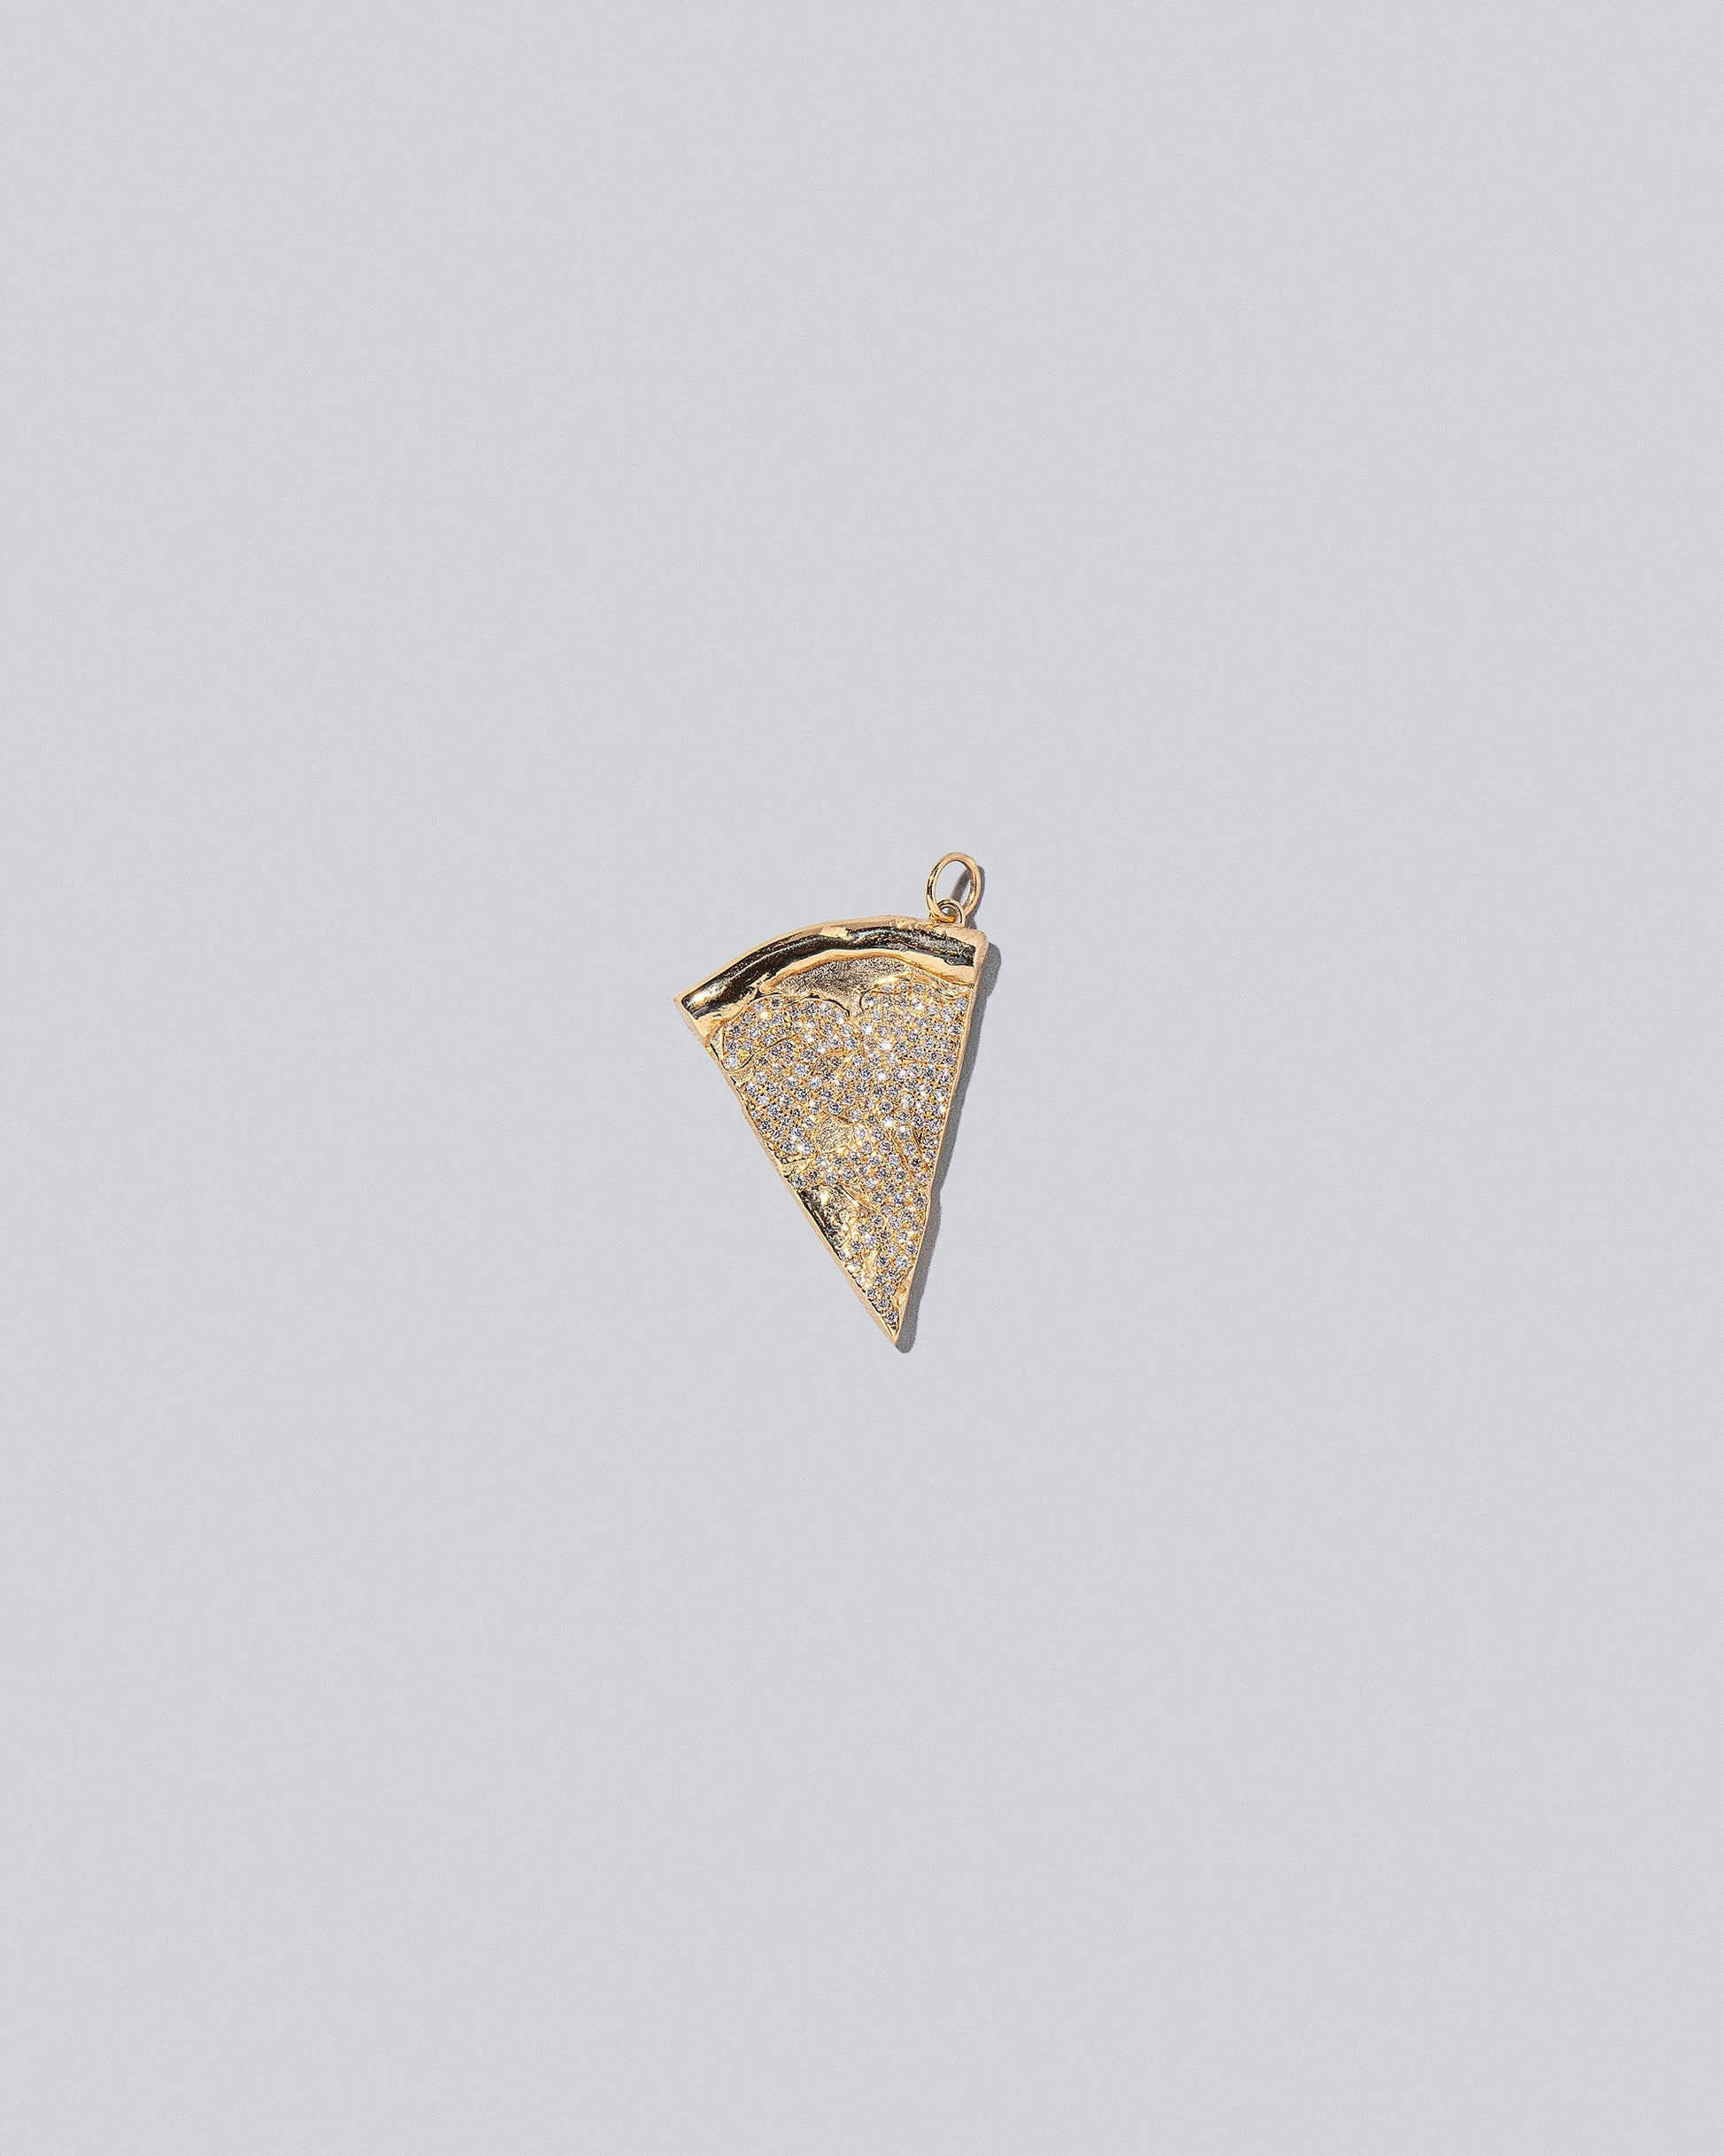  Pizza Charm - Cheese Slices on light color background.